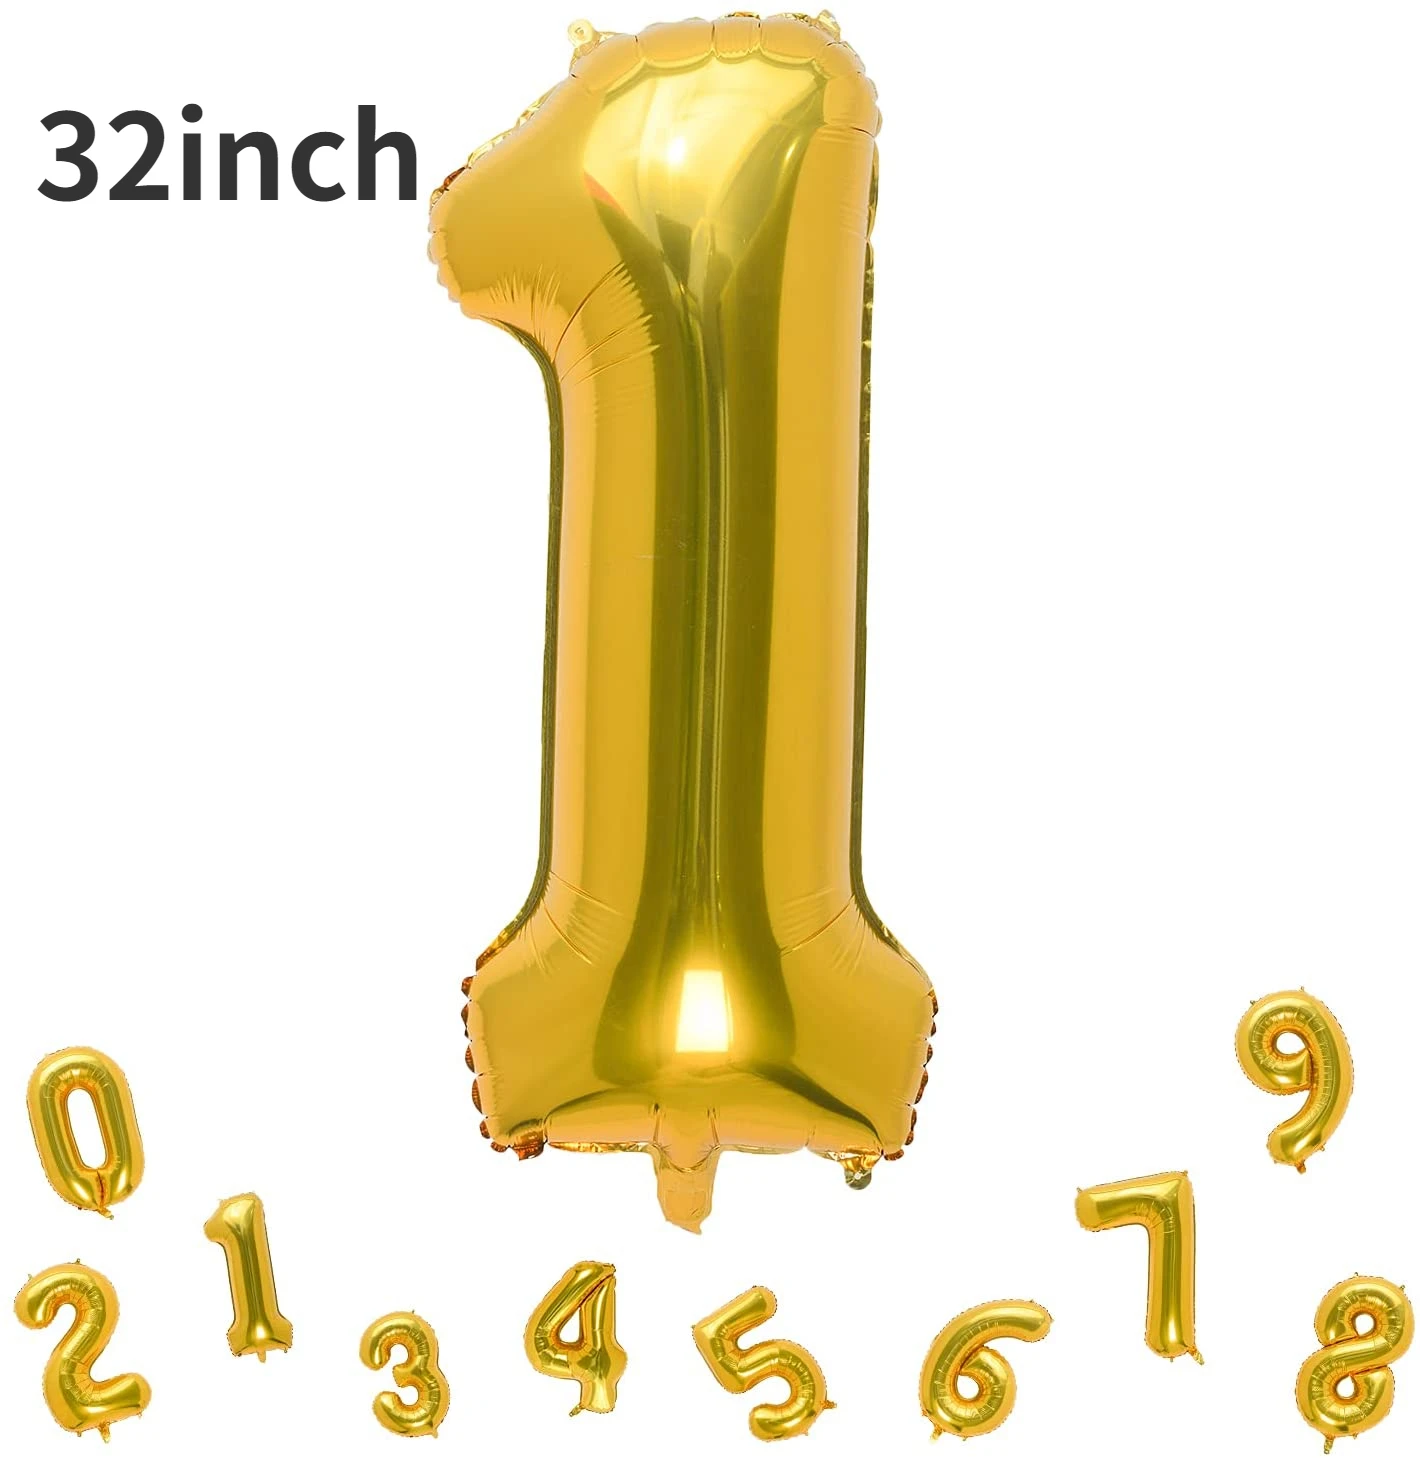 32inch Gold Number Balloon Birthday Wedding Party Supplies Decorations Foil Balloons Kid Boy Toy Baby Shower Foil Balloons